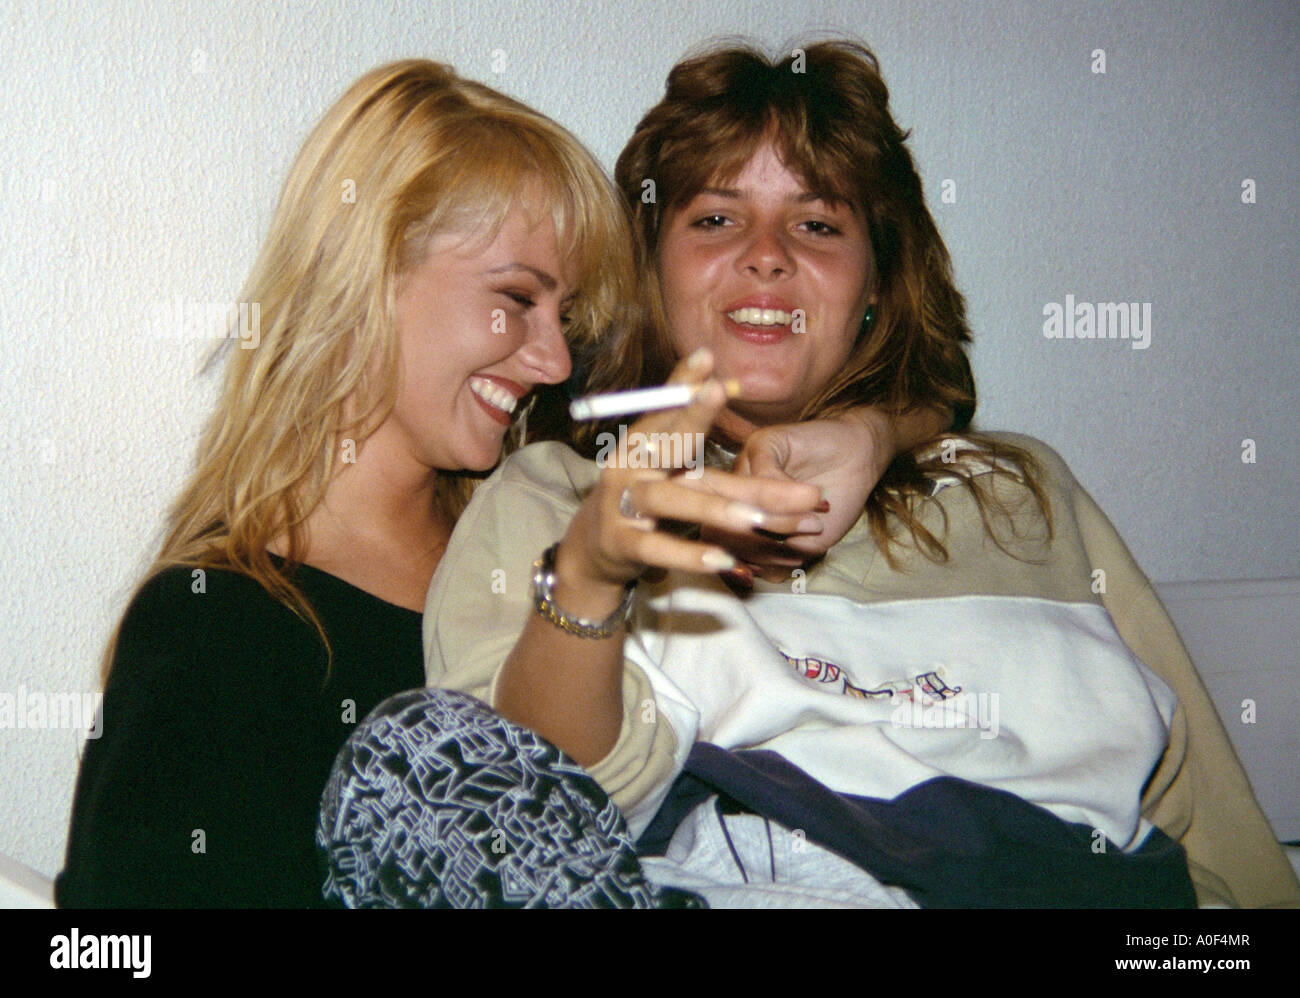 Two Drunk Girls Having a Laugh at a Party Stock Photo